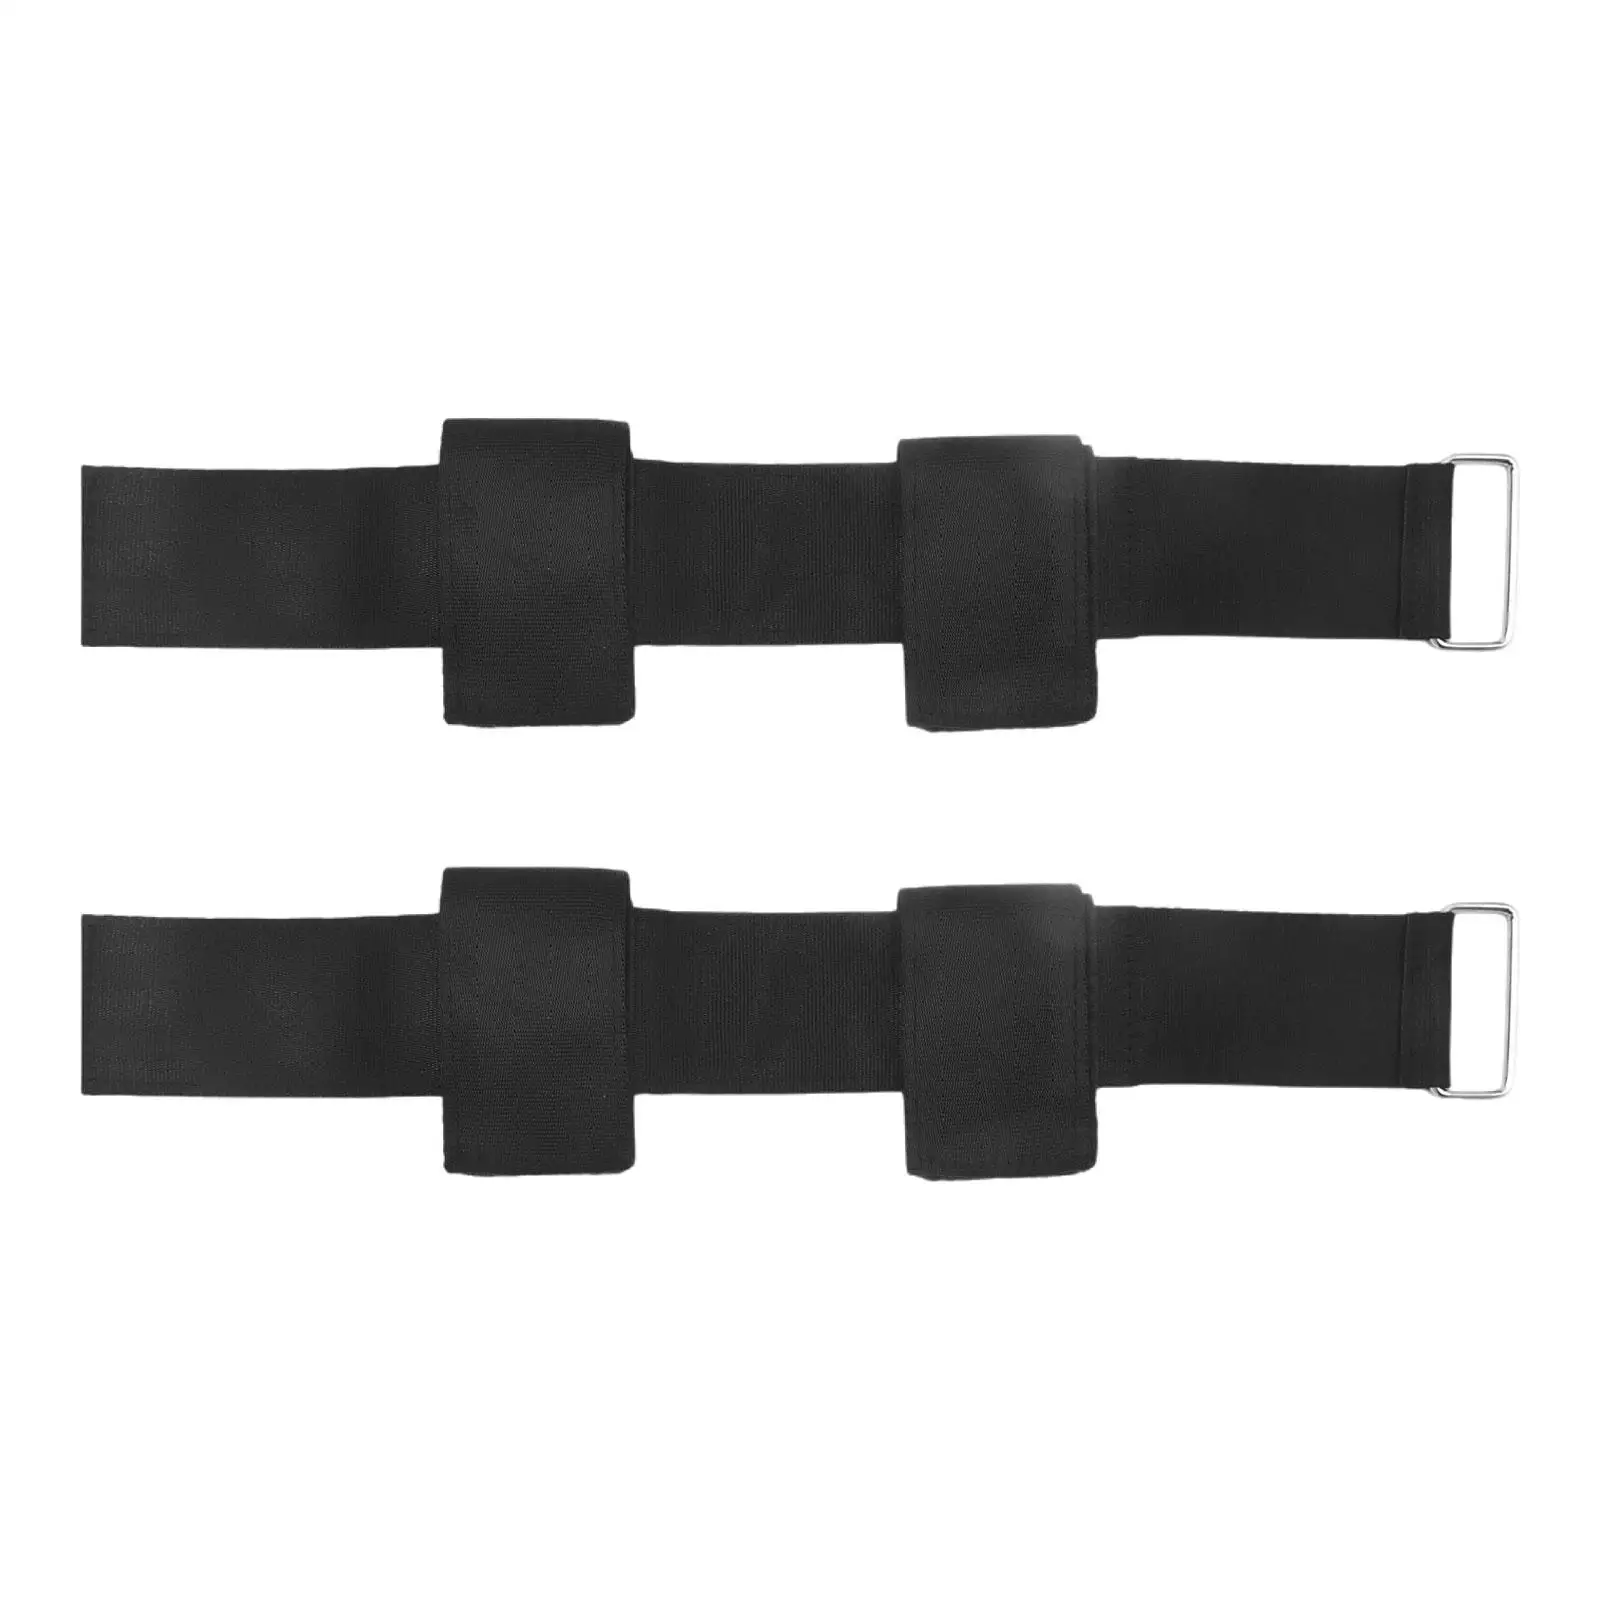 2 Pieces Dumbbell Foot Straps Wear Resistant Leg Kickbacks Leg Extensions Weightlifting Shoe Attachment for Bodybuilding